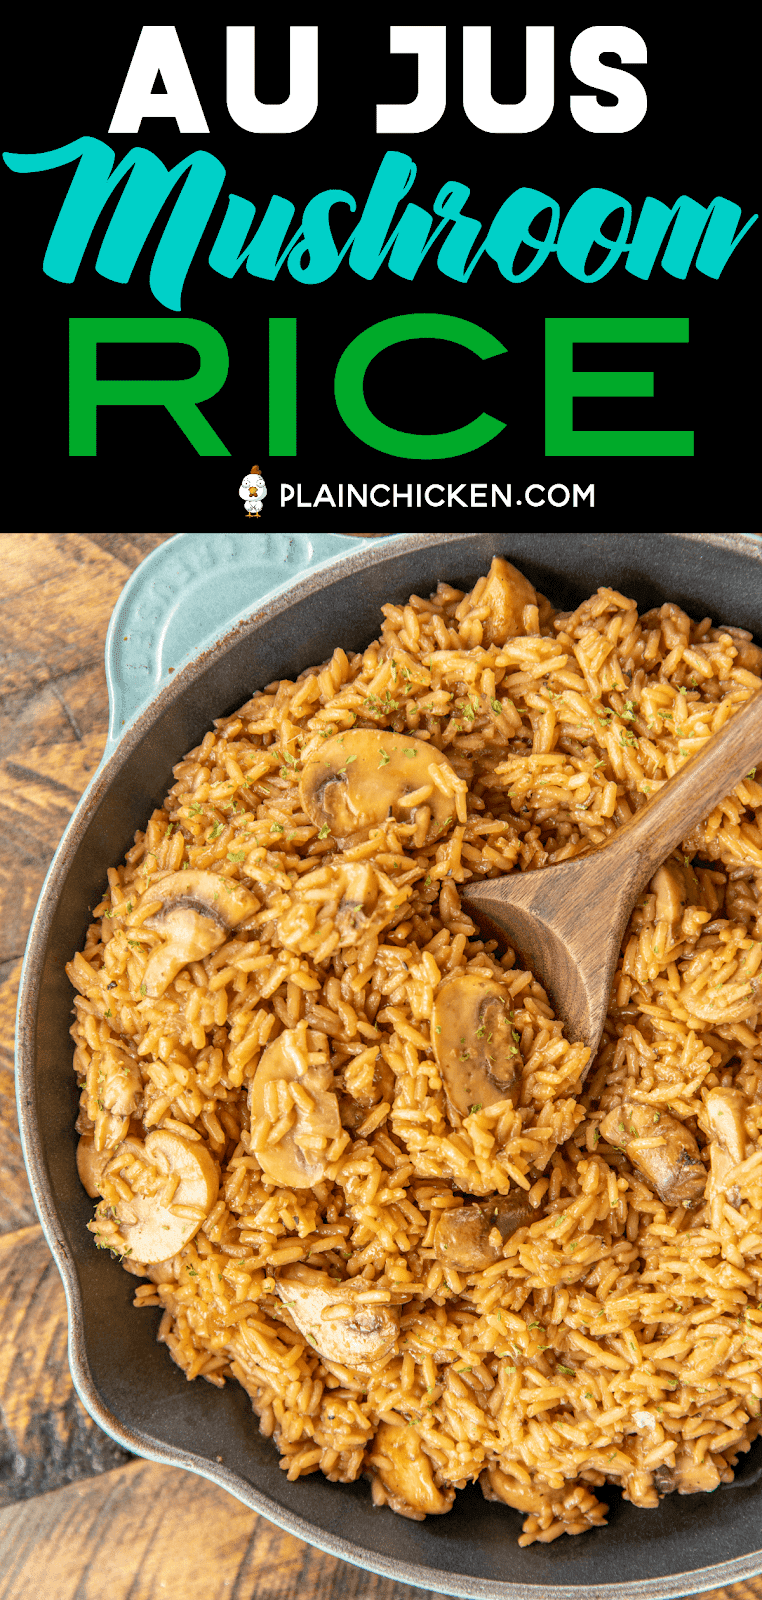 Au Jus Mushroom Rice - seriously delicious! Rice slow cooked in butter, onion, oregano, salt, pepper, beef broth, au jus gravy mix and mushrooms. I could make a meal out of this delicious rice!!! Ready to eat in under 30 minutes! Add some leftover steak, ground beef or pork for a quick main dish. #rice #beef #mushrooms